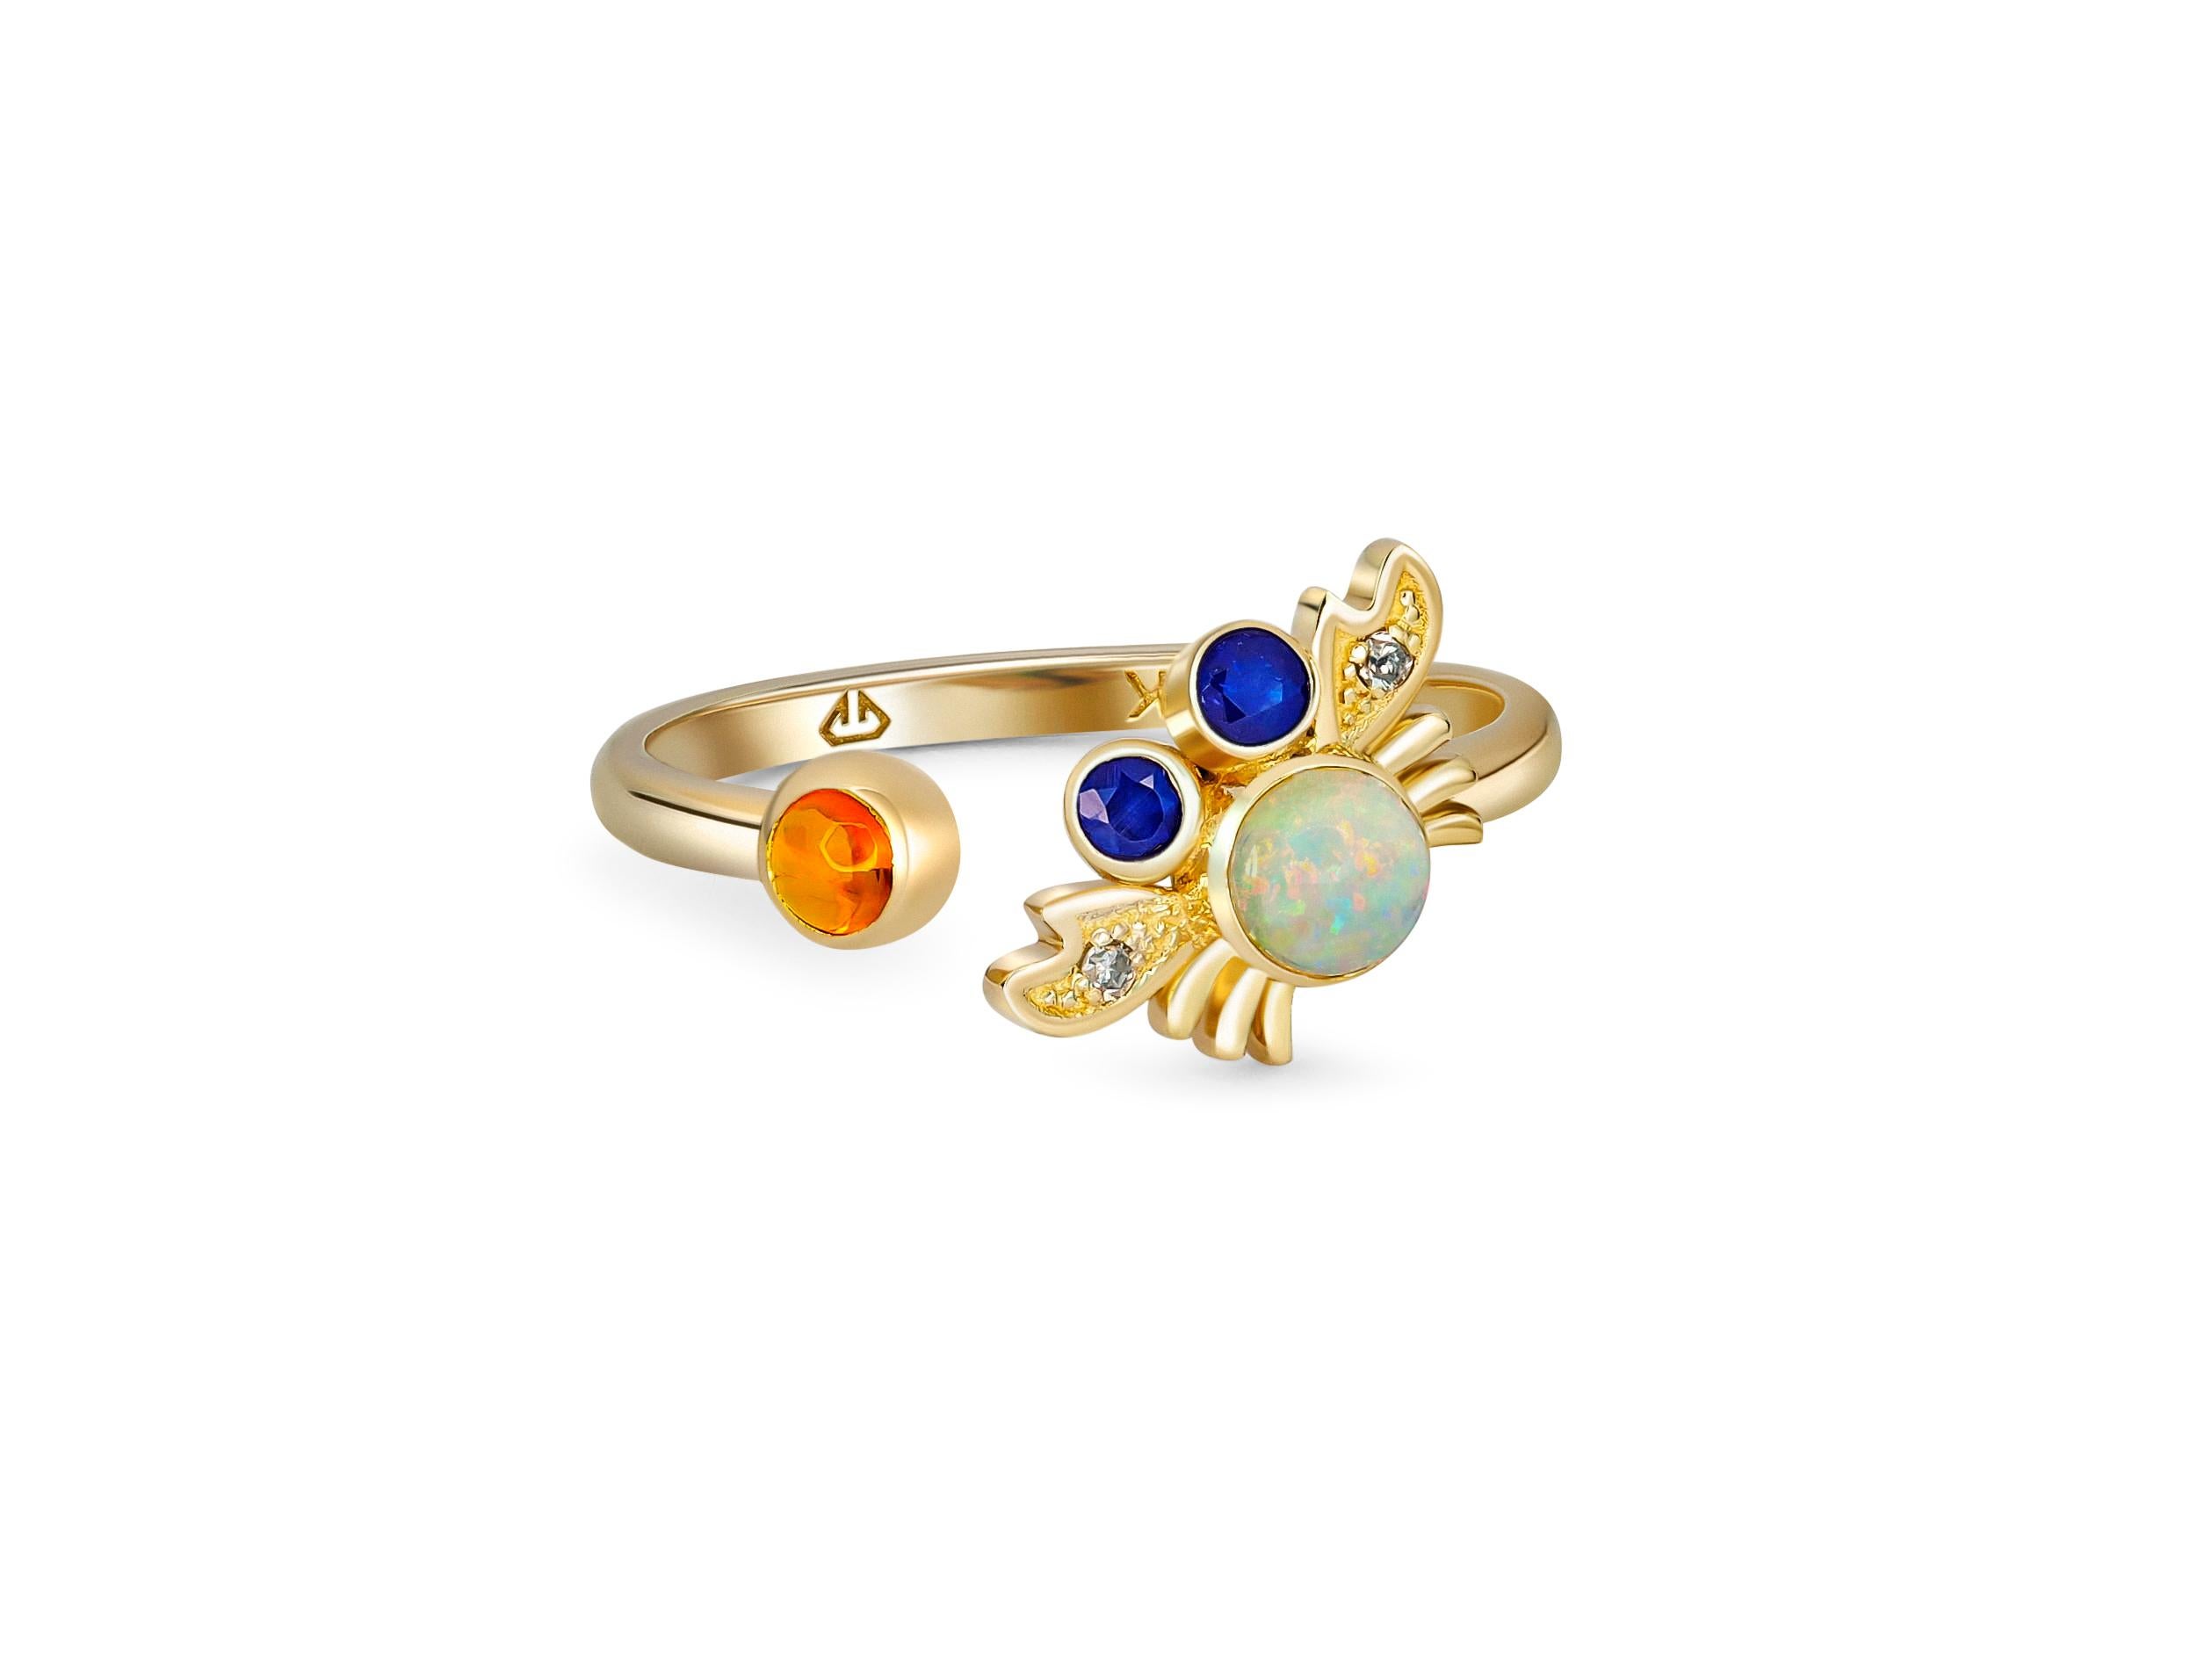 Crab gold ring with opal. 
14k gold ring with opal. Round opal gold ring. Ajustable gold ring. Animal ring with opal. Multicolor opal ring

Metal: 14k gold
Weight: 1.95 g. depends from size

Set with opal, color - multicolors
Cabochon cut, 0.45 ct.